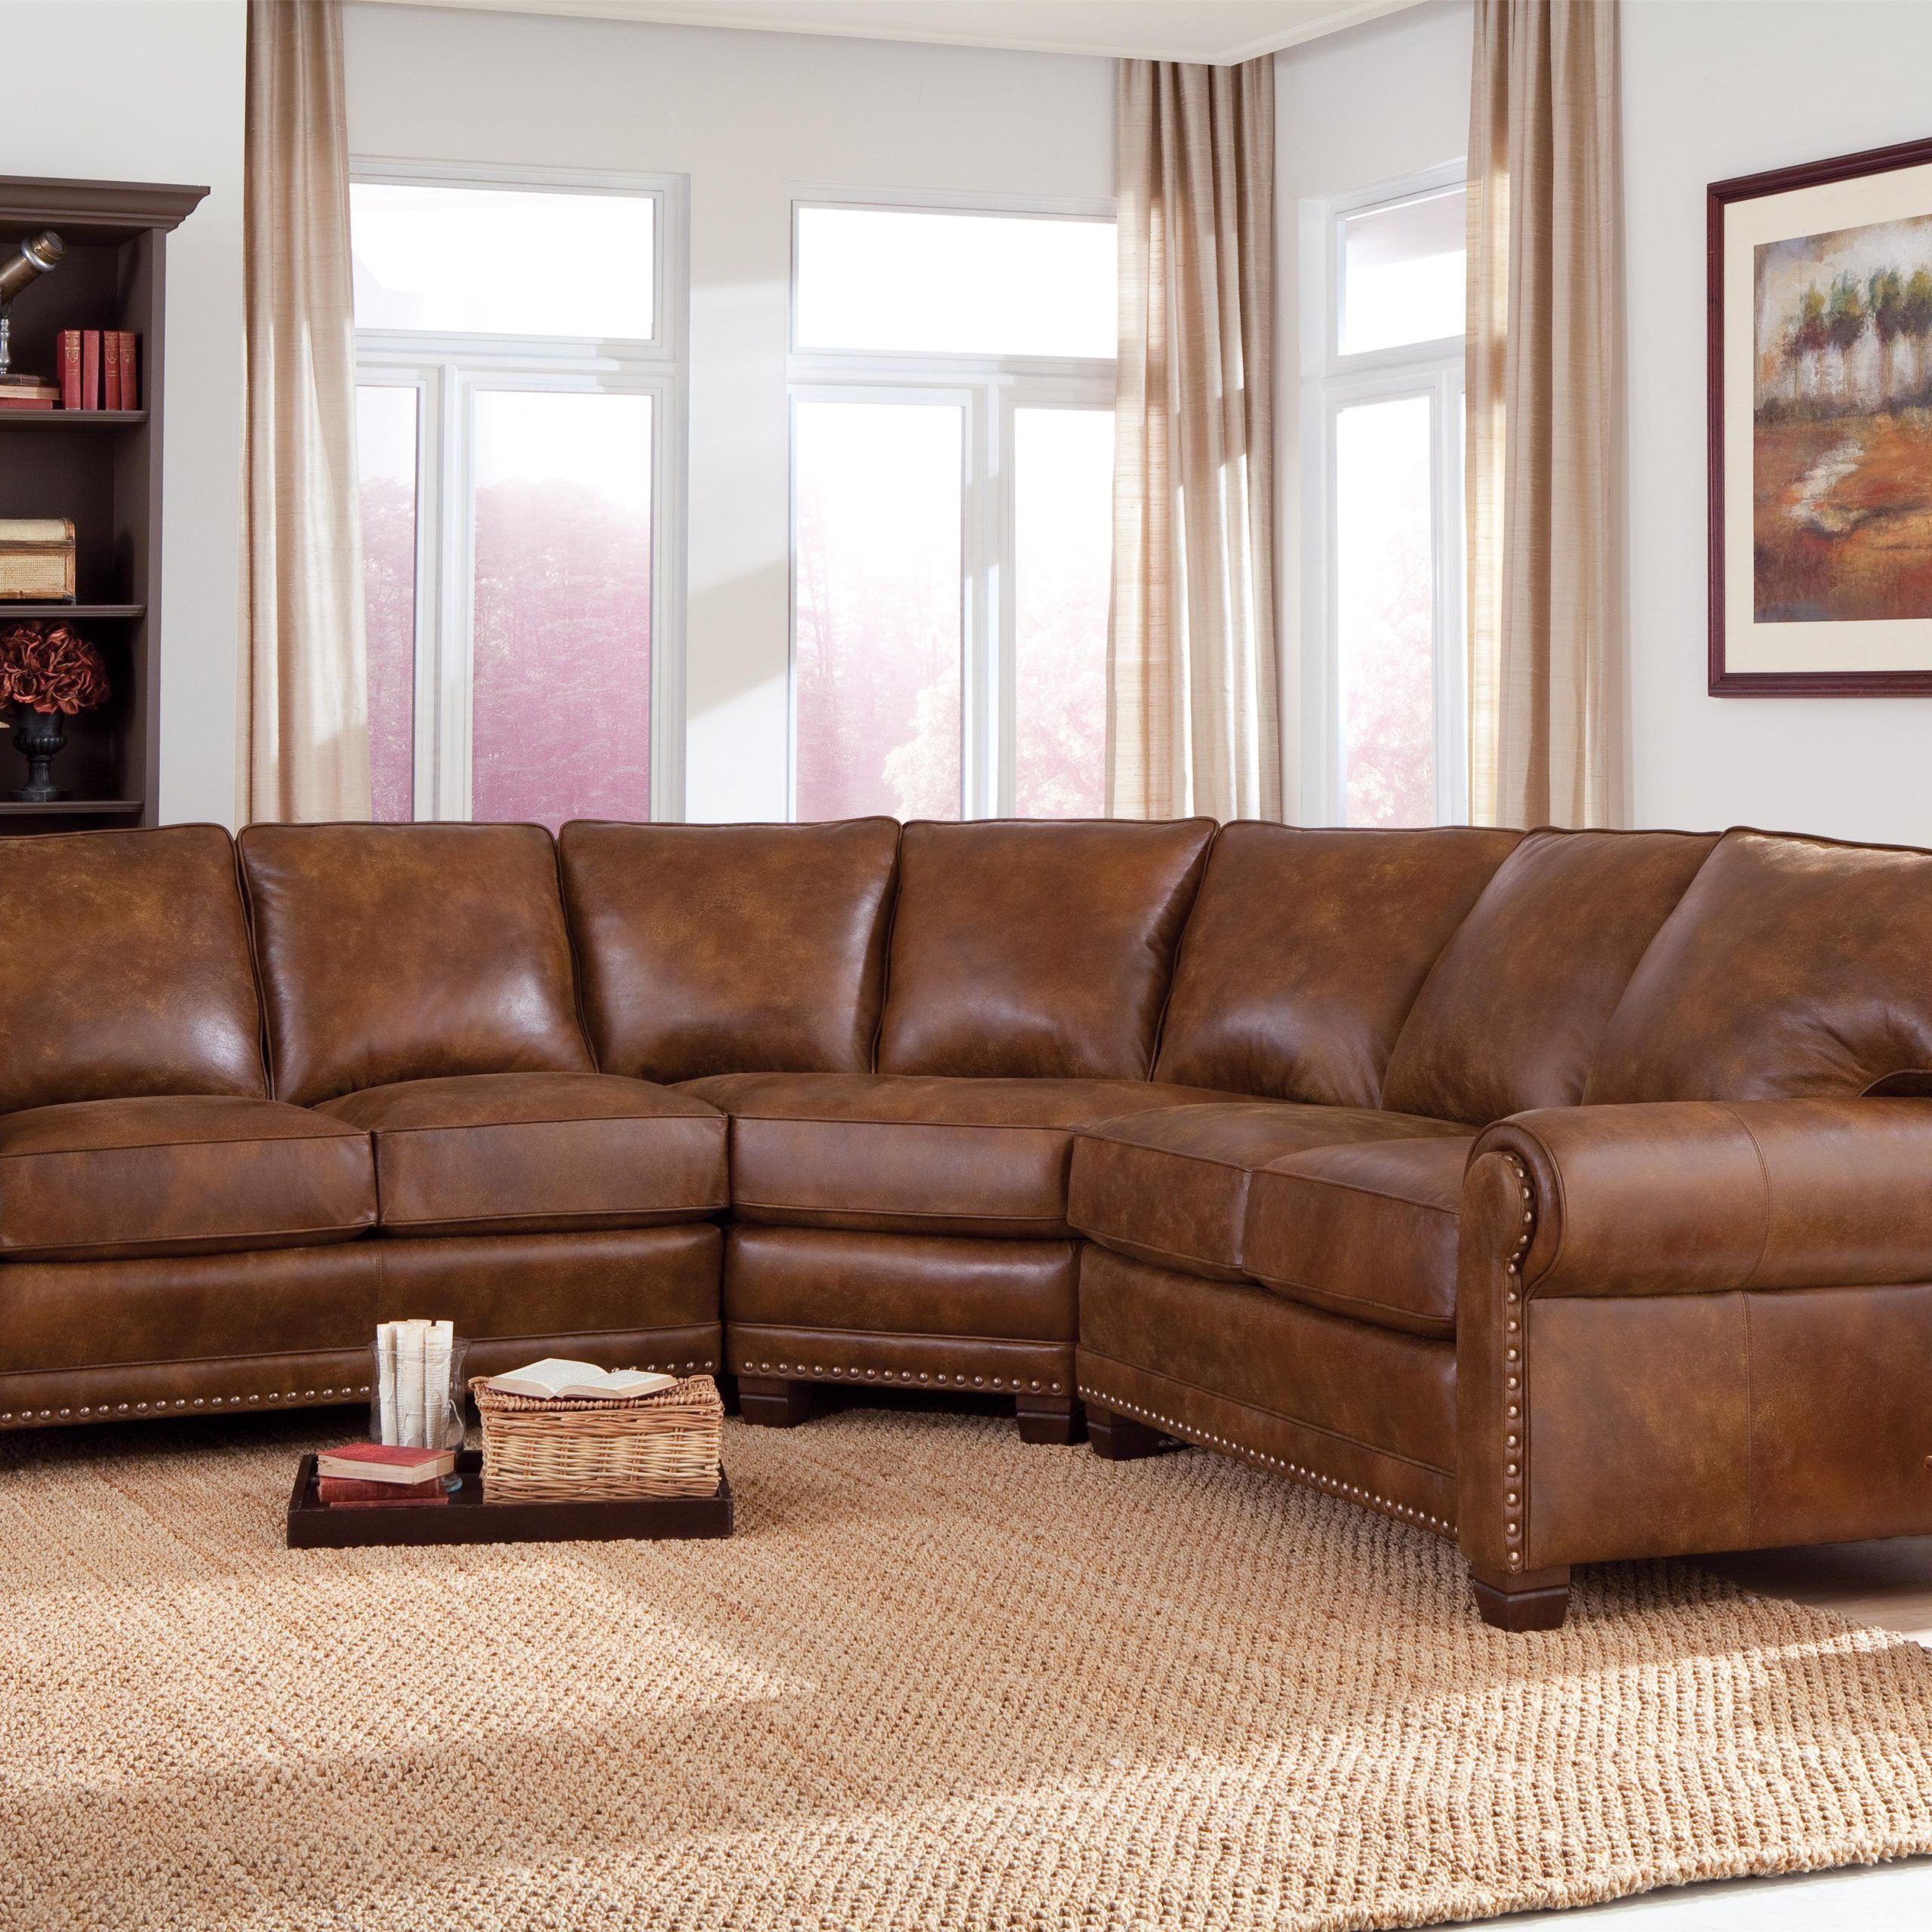 Traditional 3 Piece Sectional Sofa With Nailhead Trimsmith Brothers For 3 Piece Leather Sectional Sofa Sets (View 4 of 20)